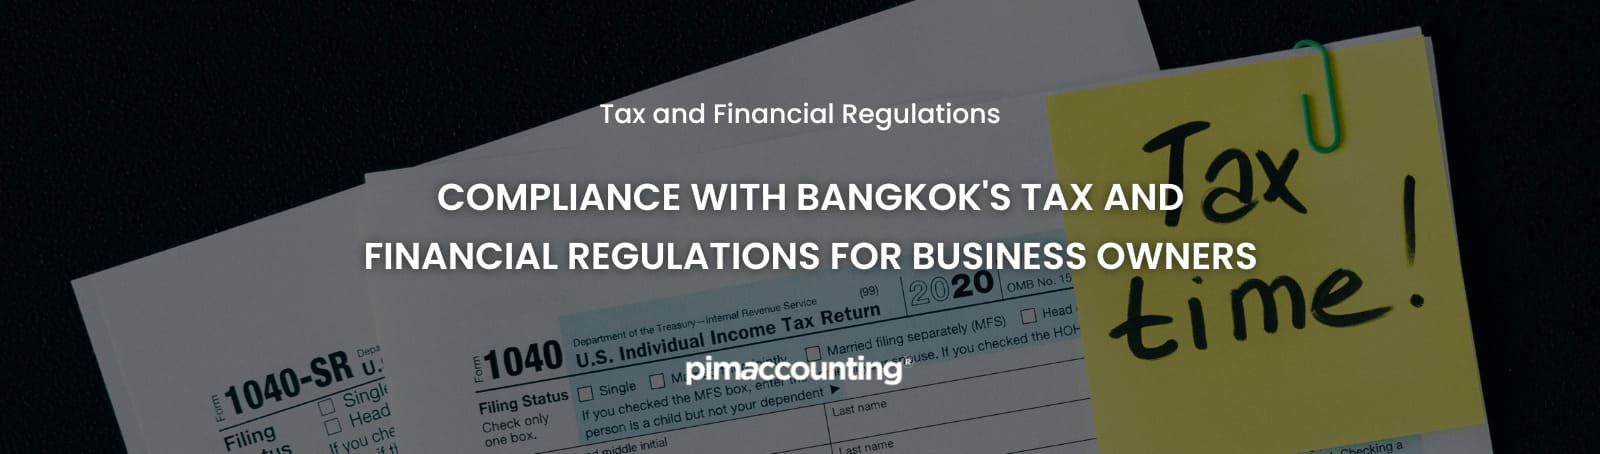 Tax and Financial Regulations - Pimaccounting